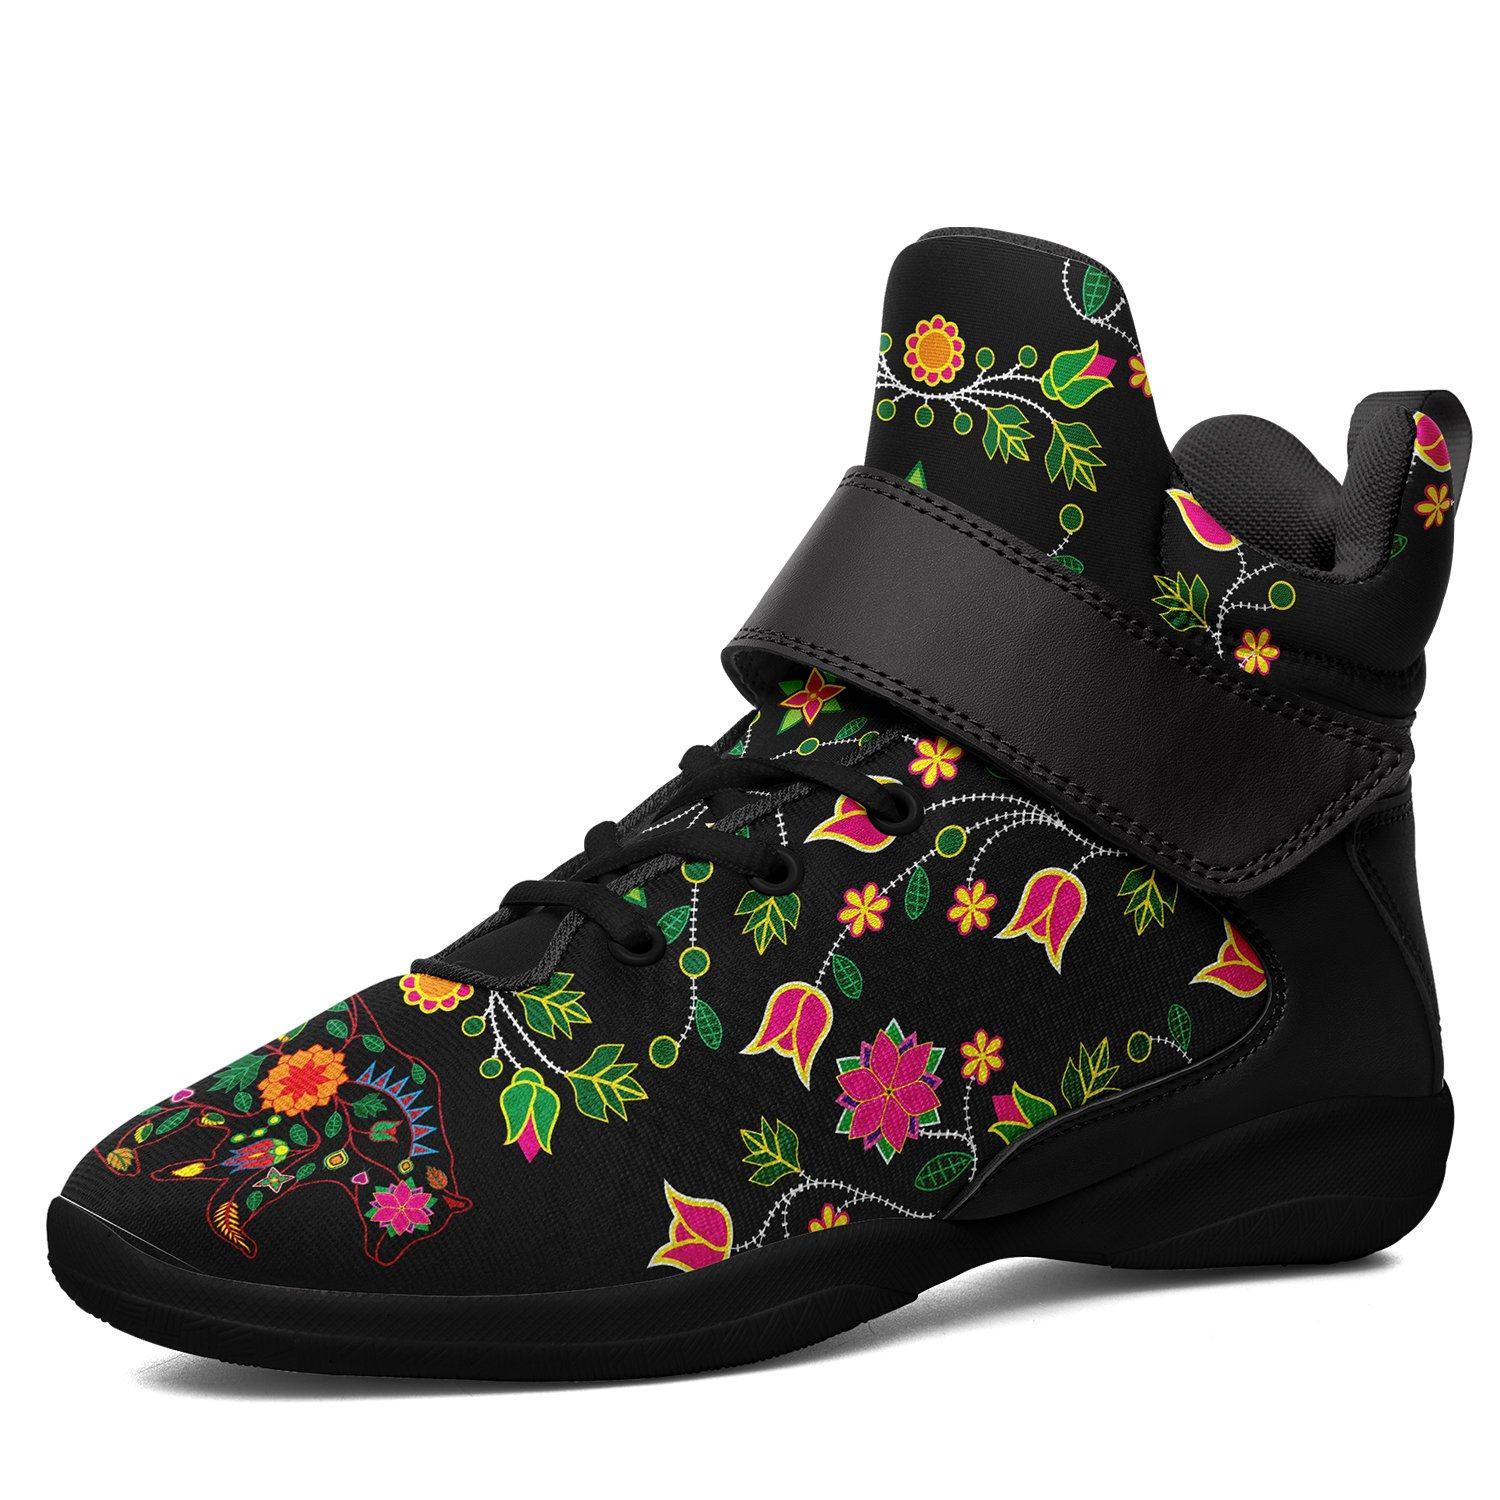 Floral Bear Ipottaa Basketball / Sport High Top Shoes - Black Sole 49 Dzine US Men 7 / EUR 40 Black Sole with Black Strap 